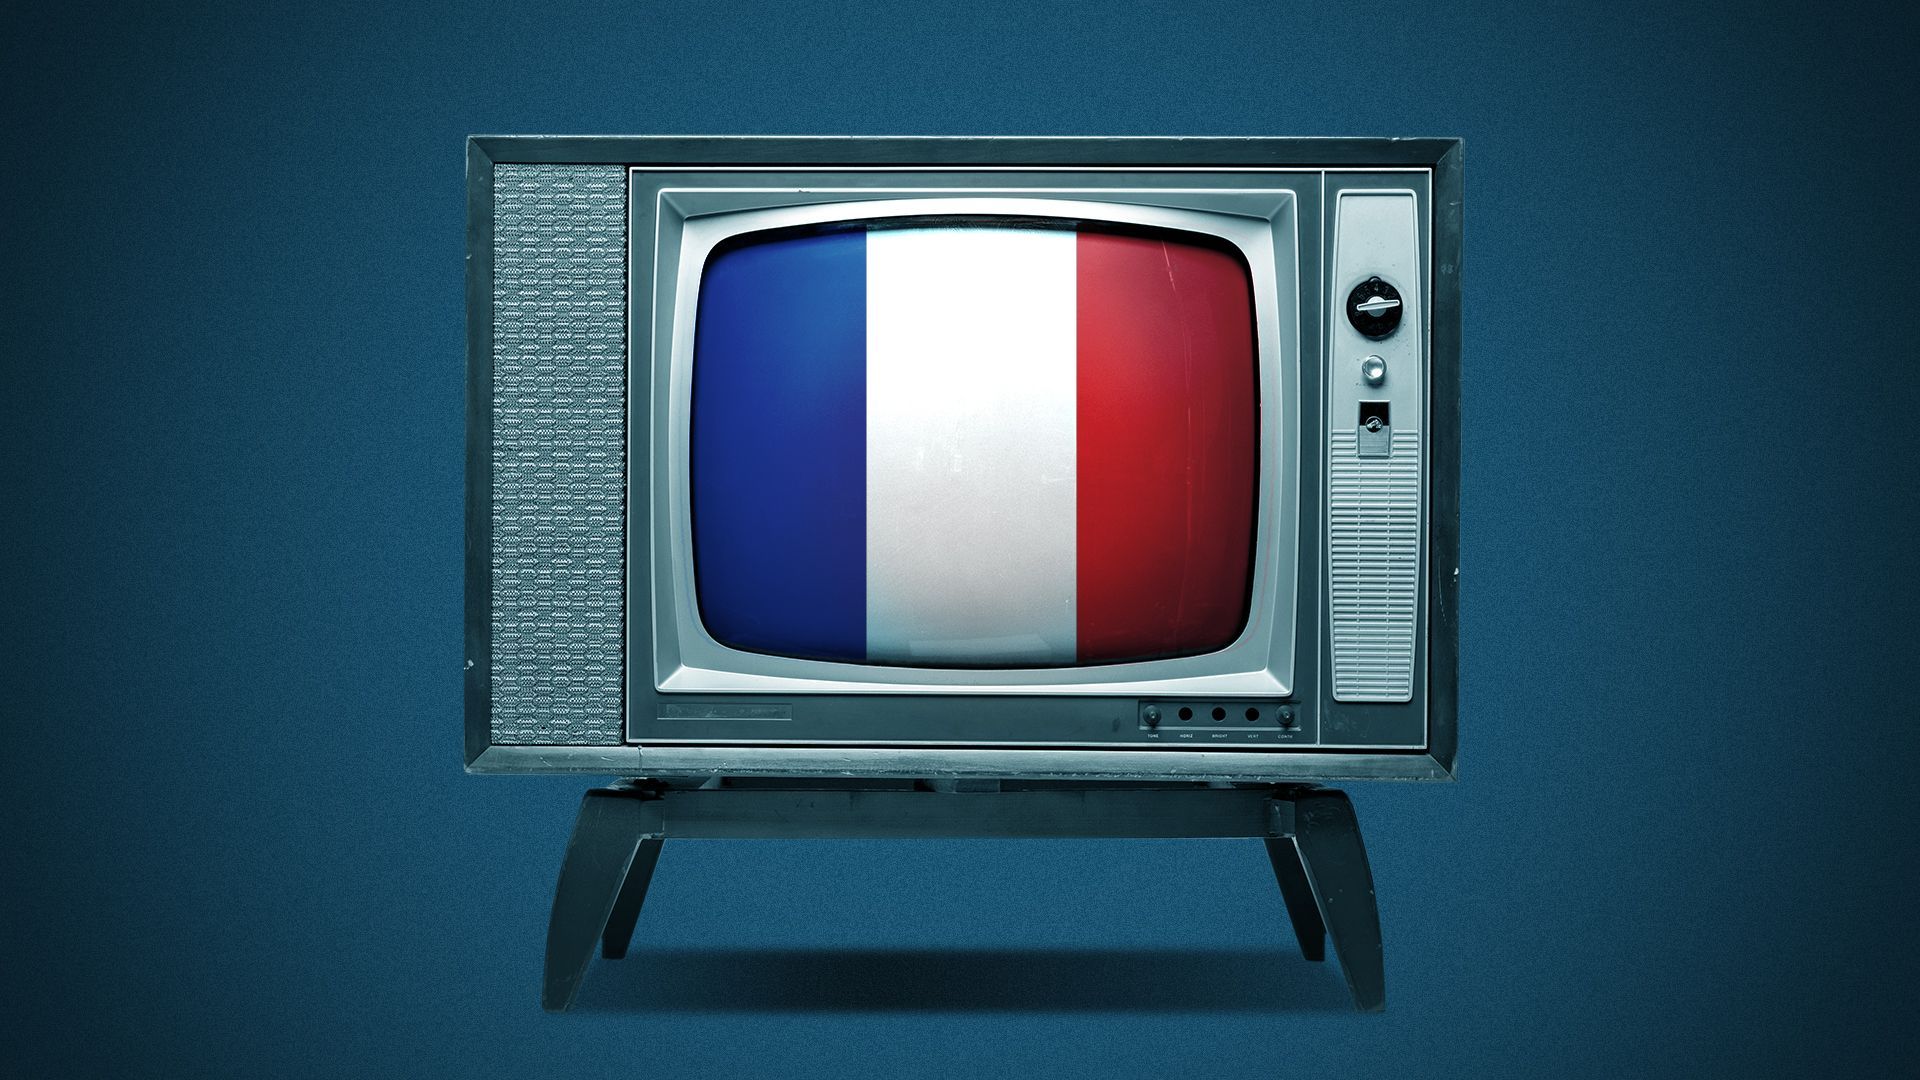 Illustration of a television with the French flag on its screen.